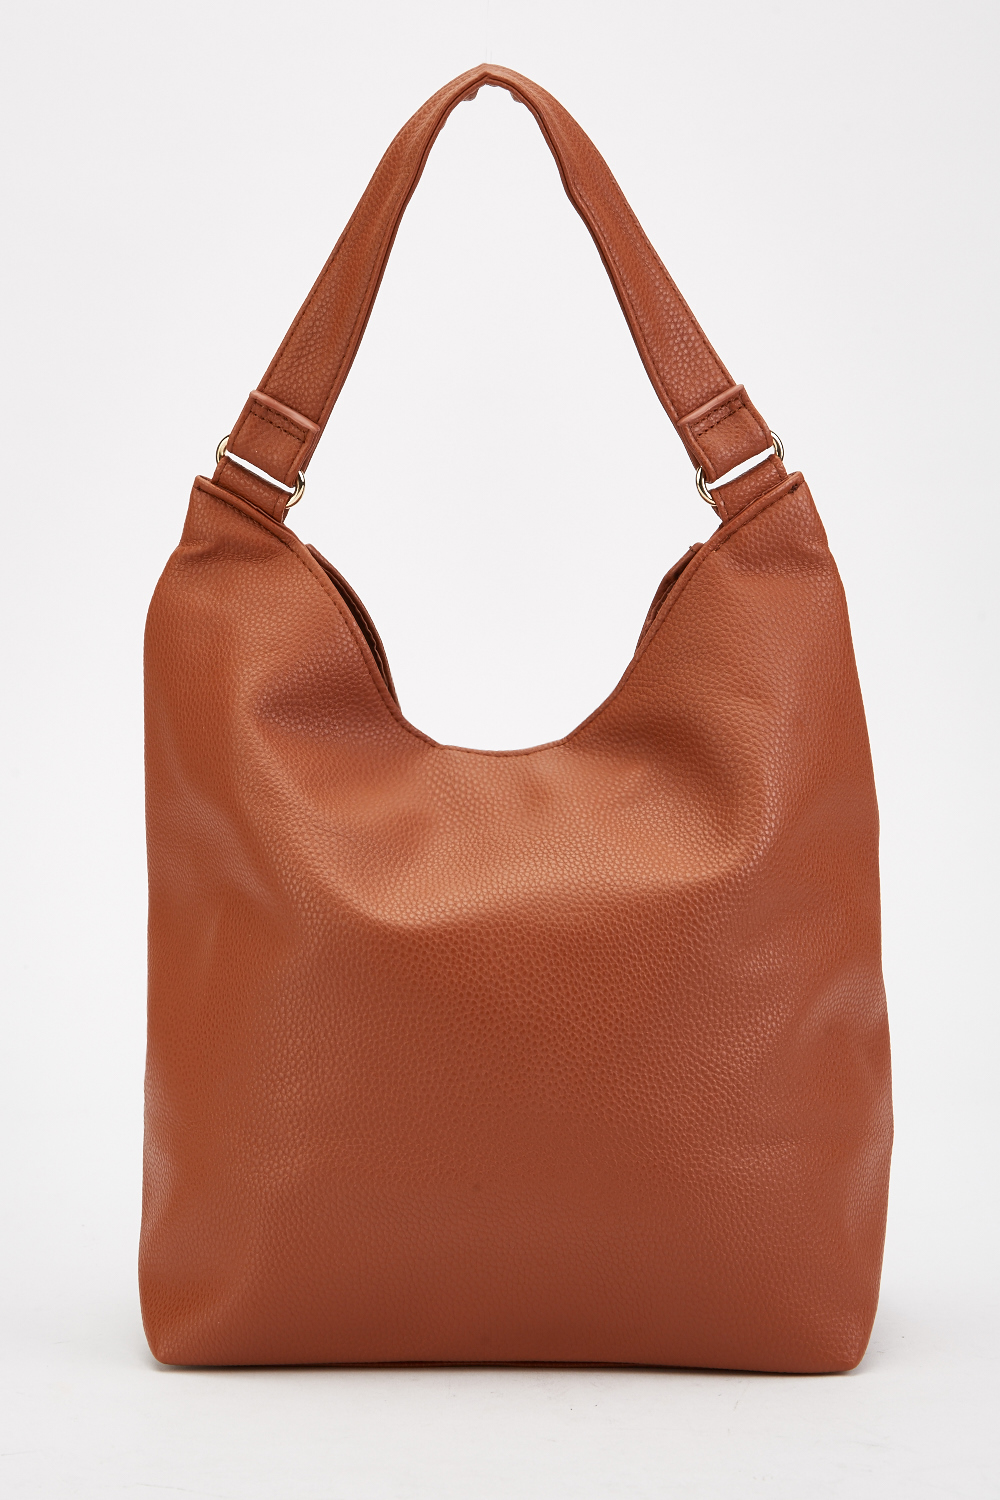 Textured Leather Hobo Bag - Just $7